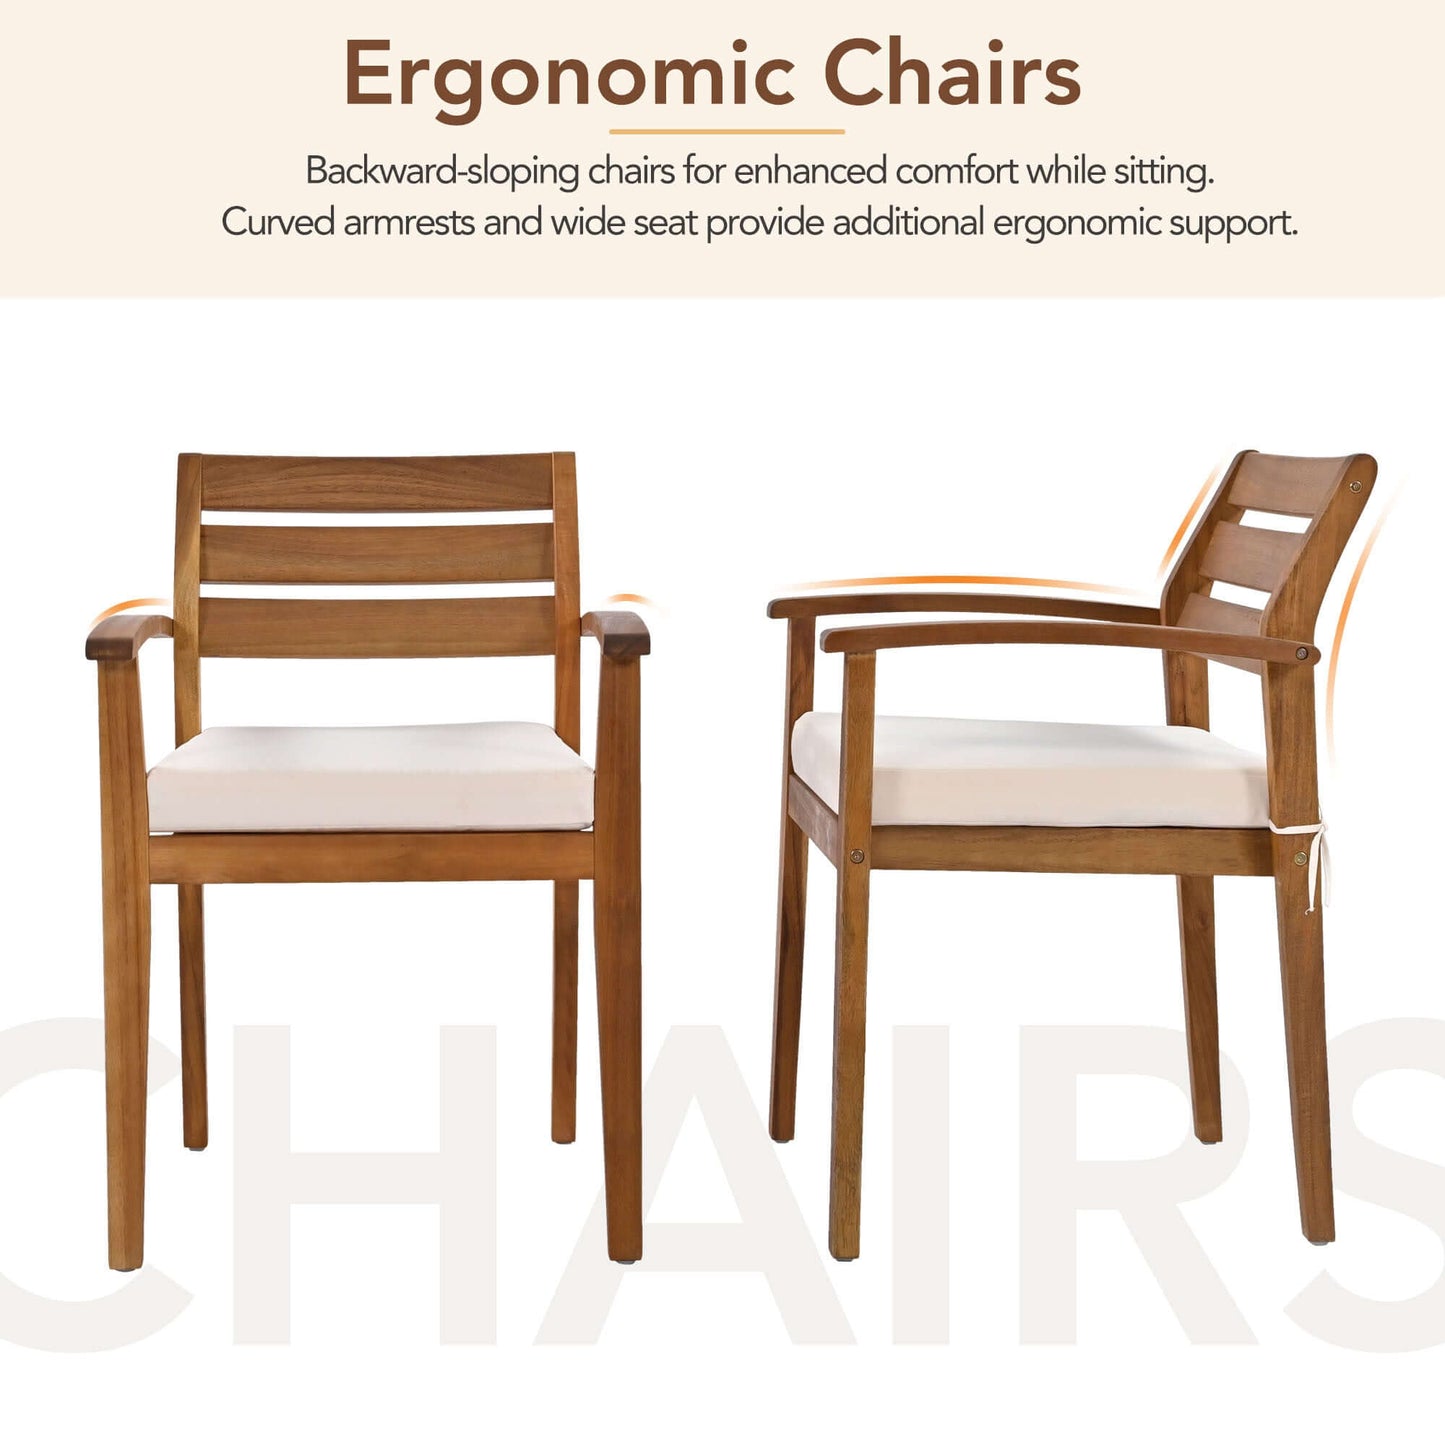 Two acacia wood ergonomic chairs with backward-sloping seats and curved armrests for outdoor dining furniture.